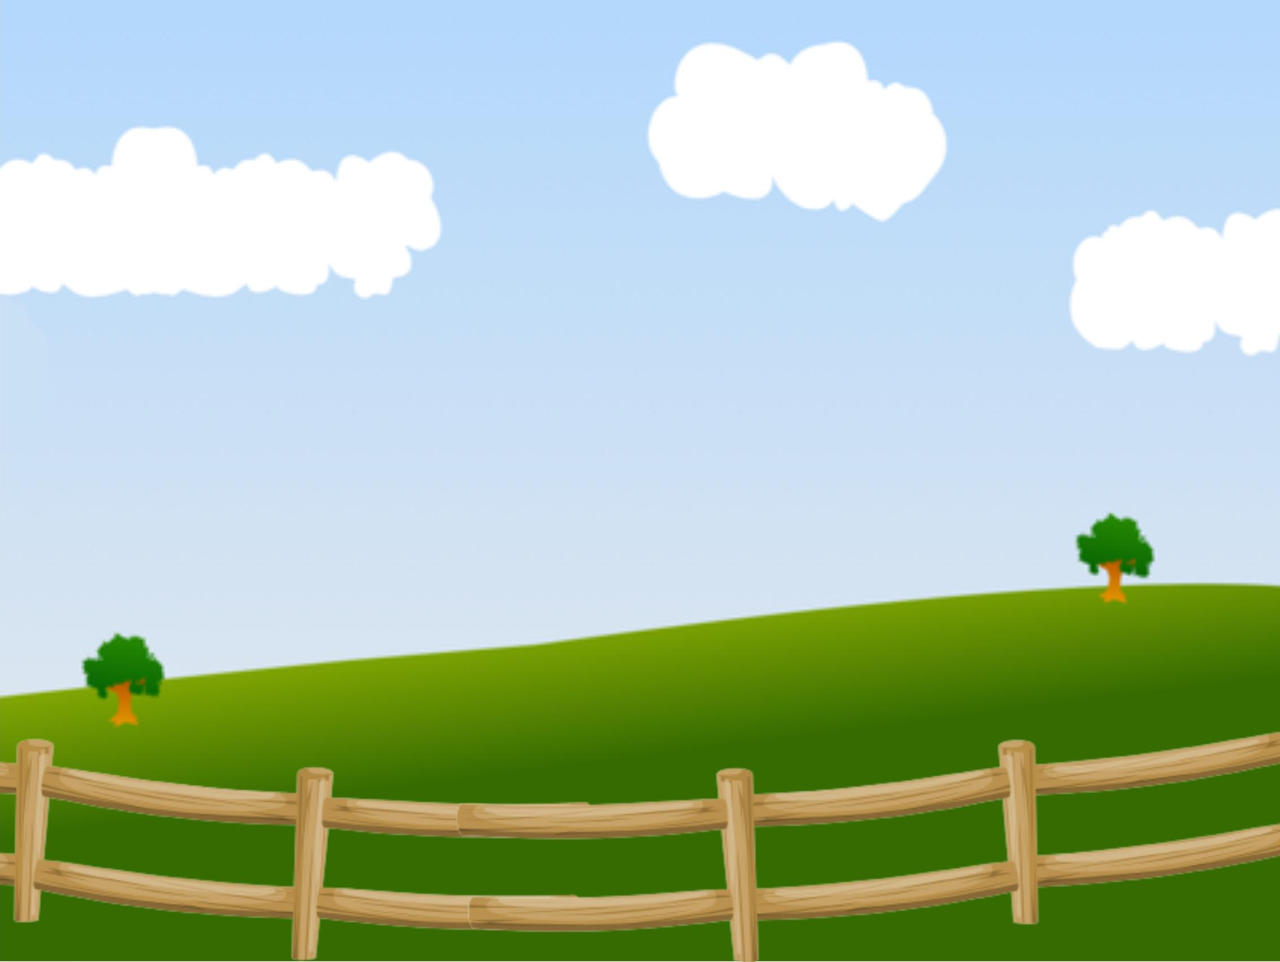 ABC Clever Background Fence by IsaacHelton on DeviantArt